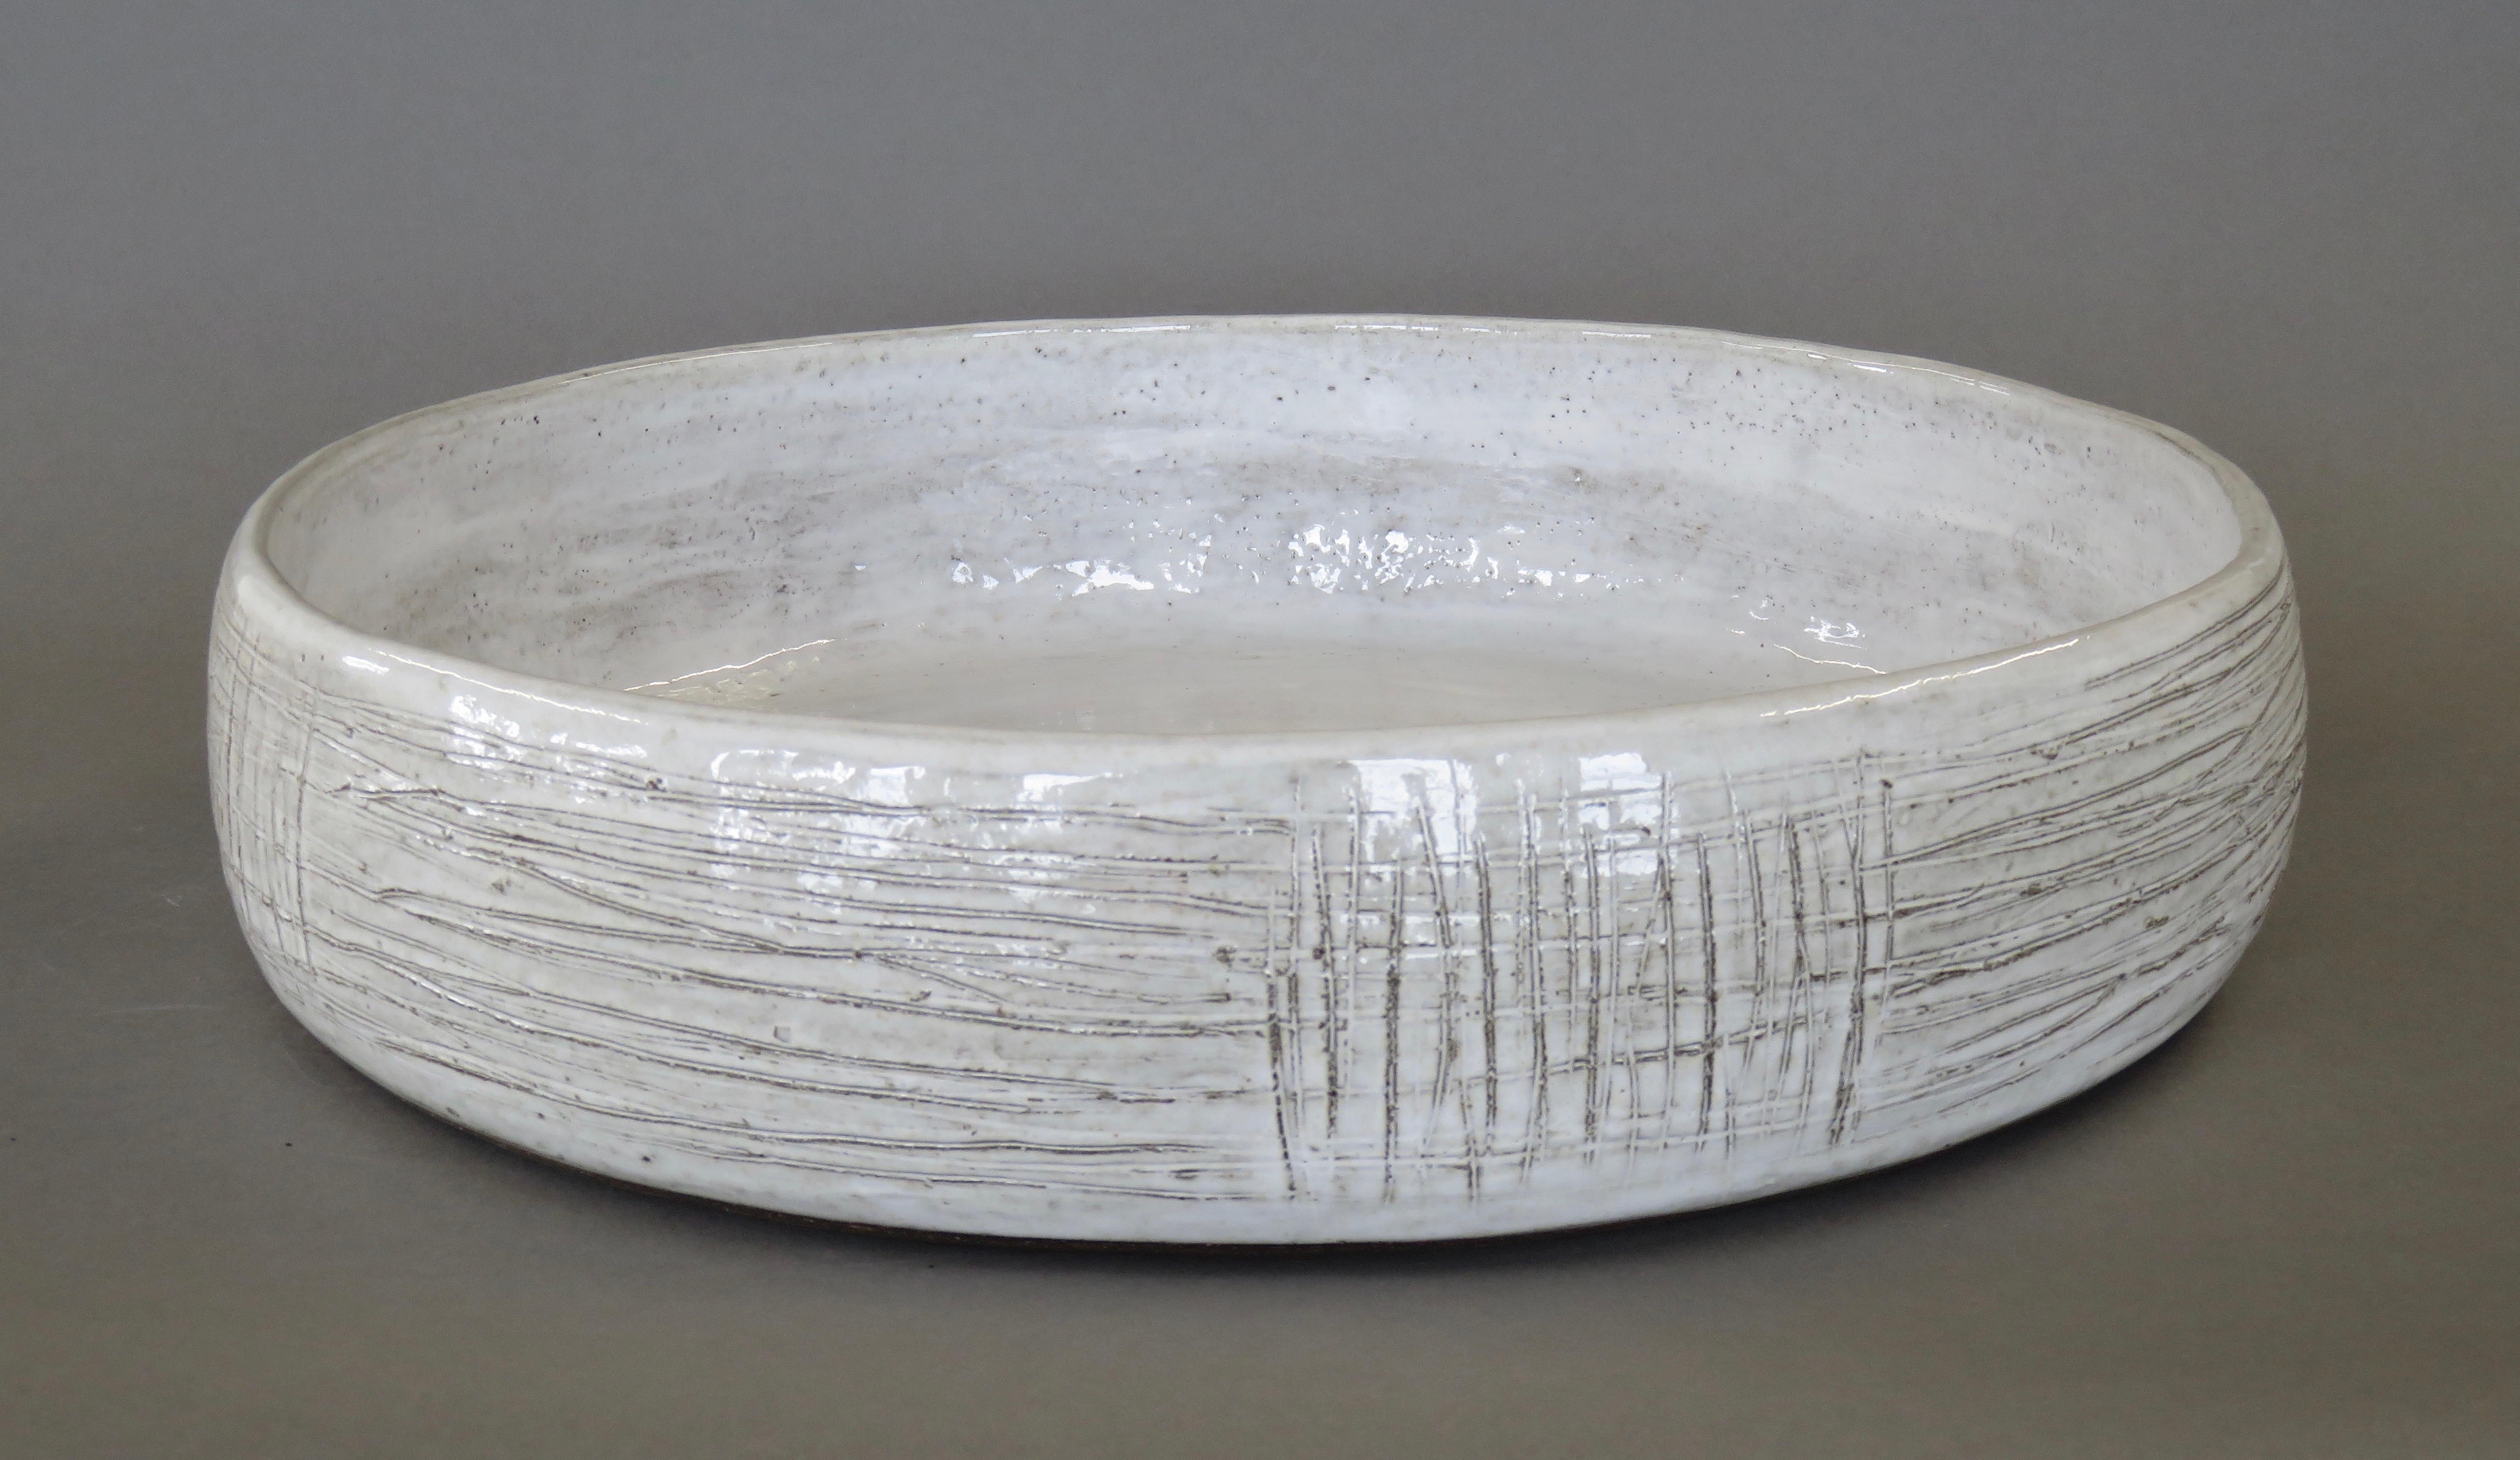 Mid-Century Modern Large Low Serving Bowl, Carved Exterior with White Glaze, Hand Built Ceramic